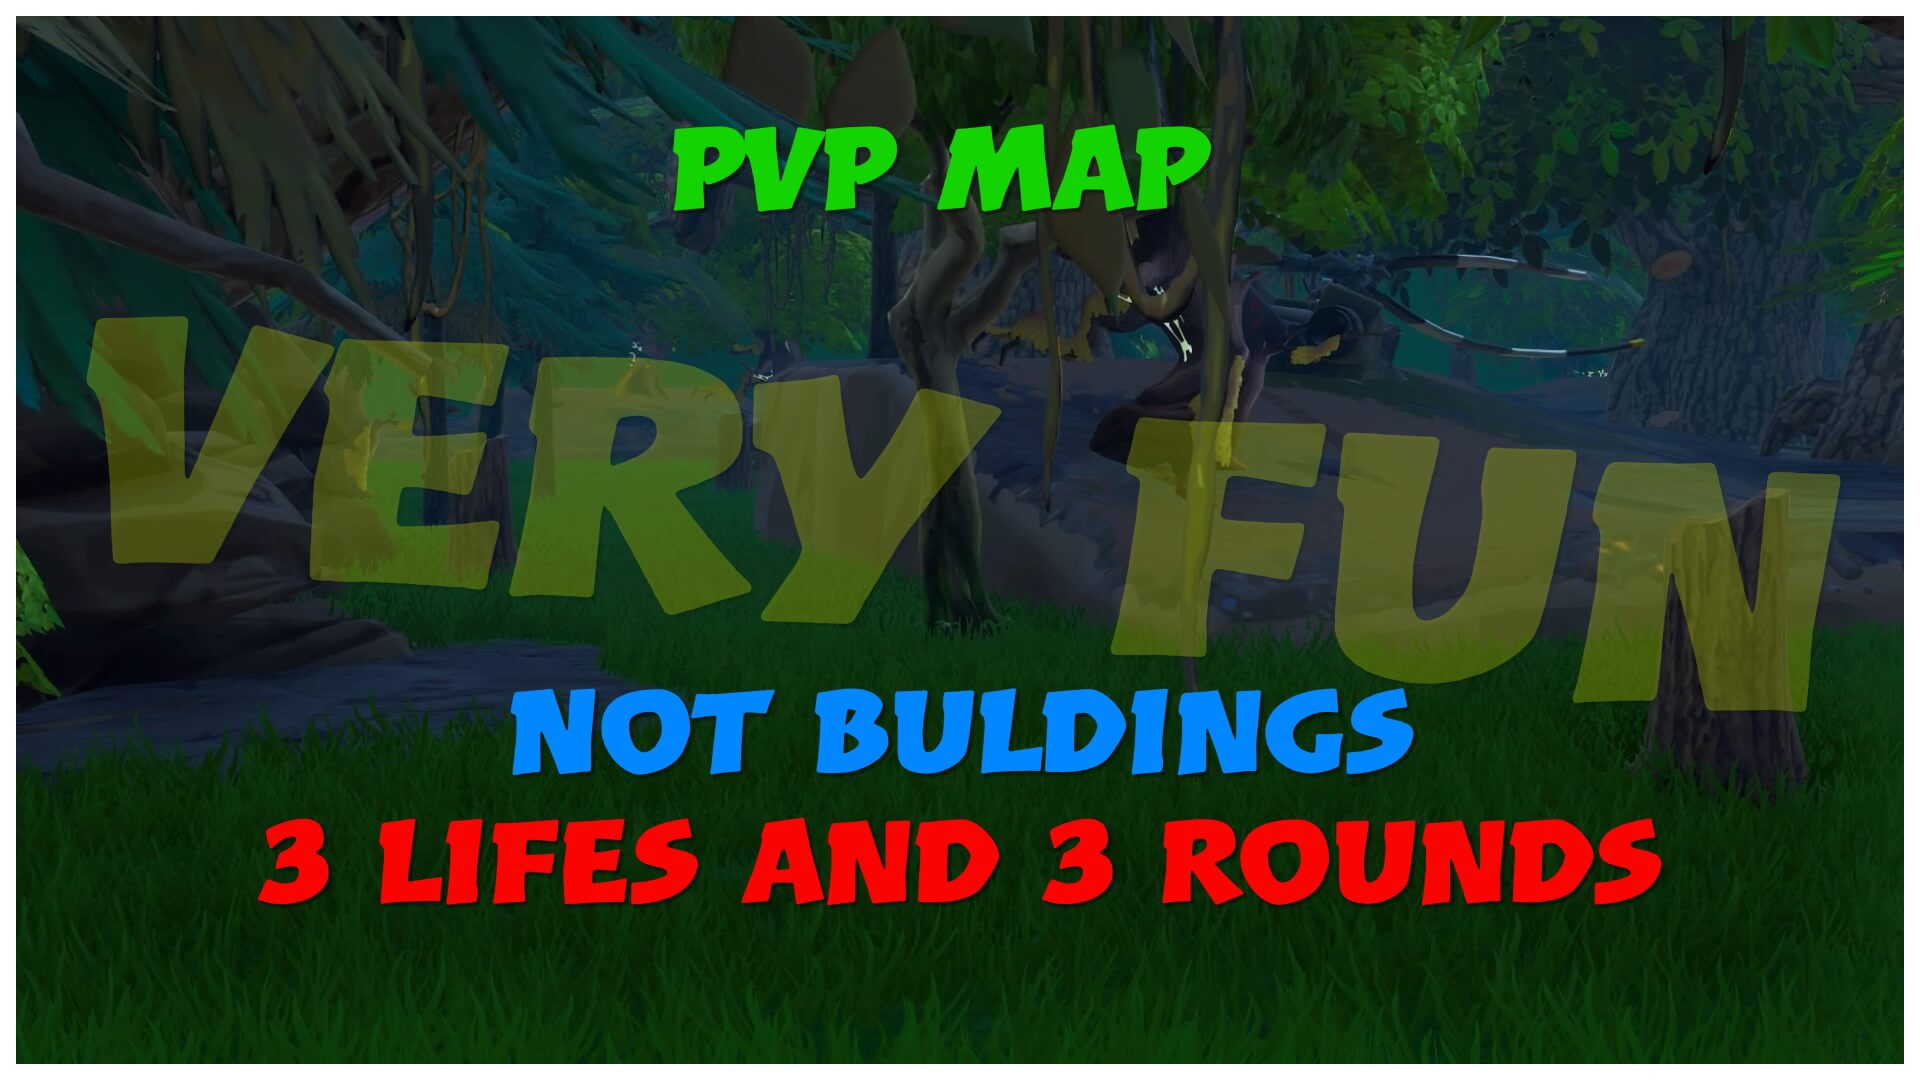 PVP FOR YETIS (NOT BUILDINGS)